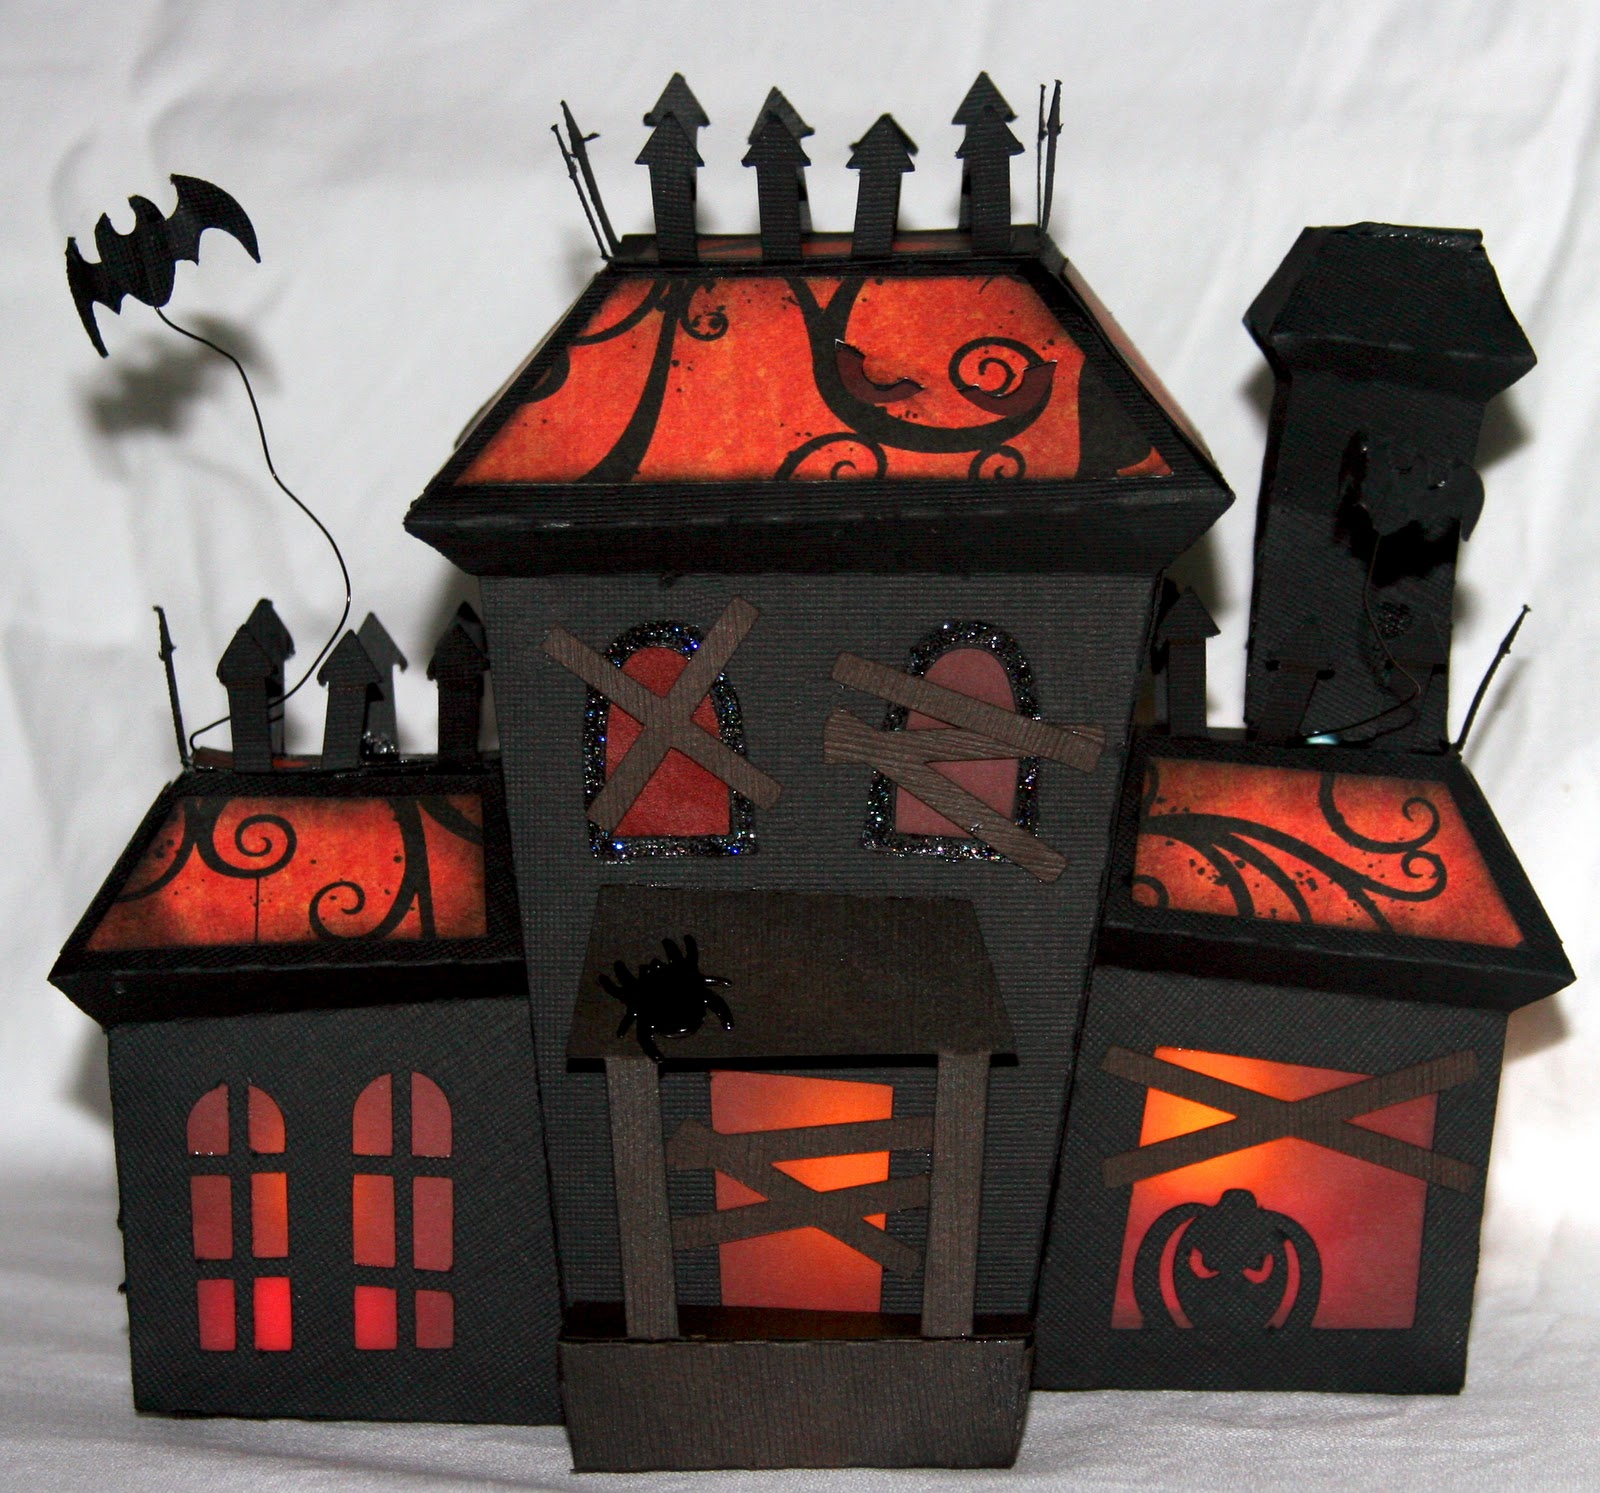 Download OBX Stamping & Crafting: SVGcuts.com 3D Haunted House